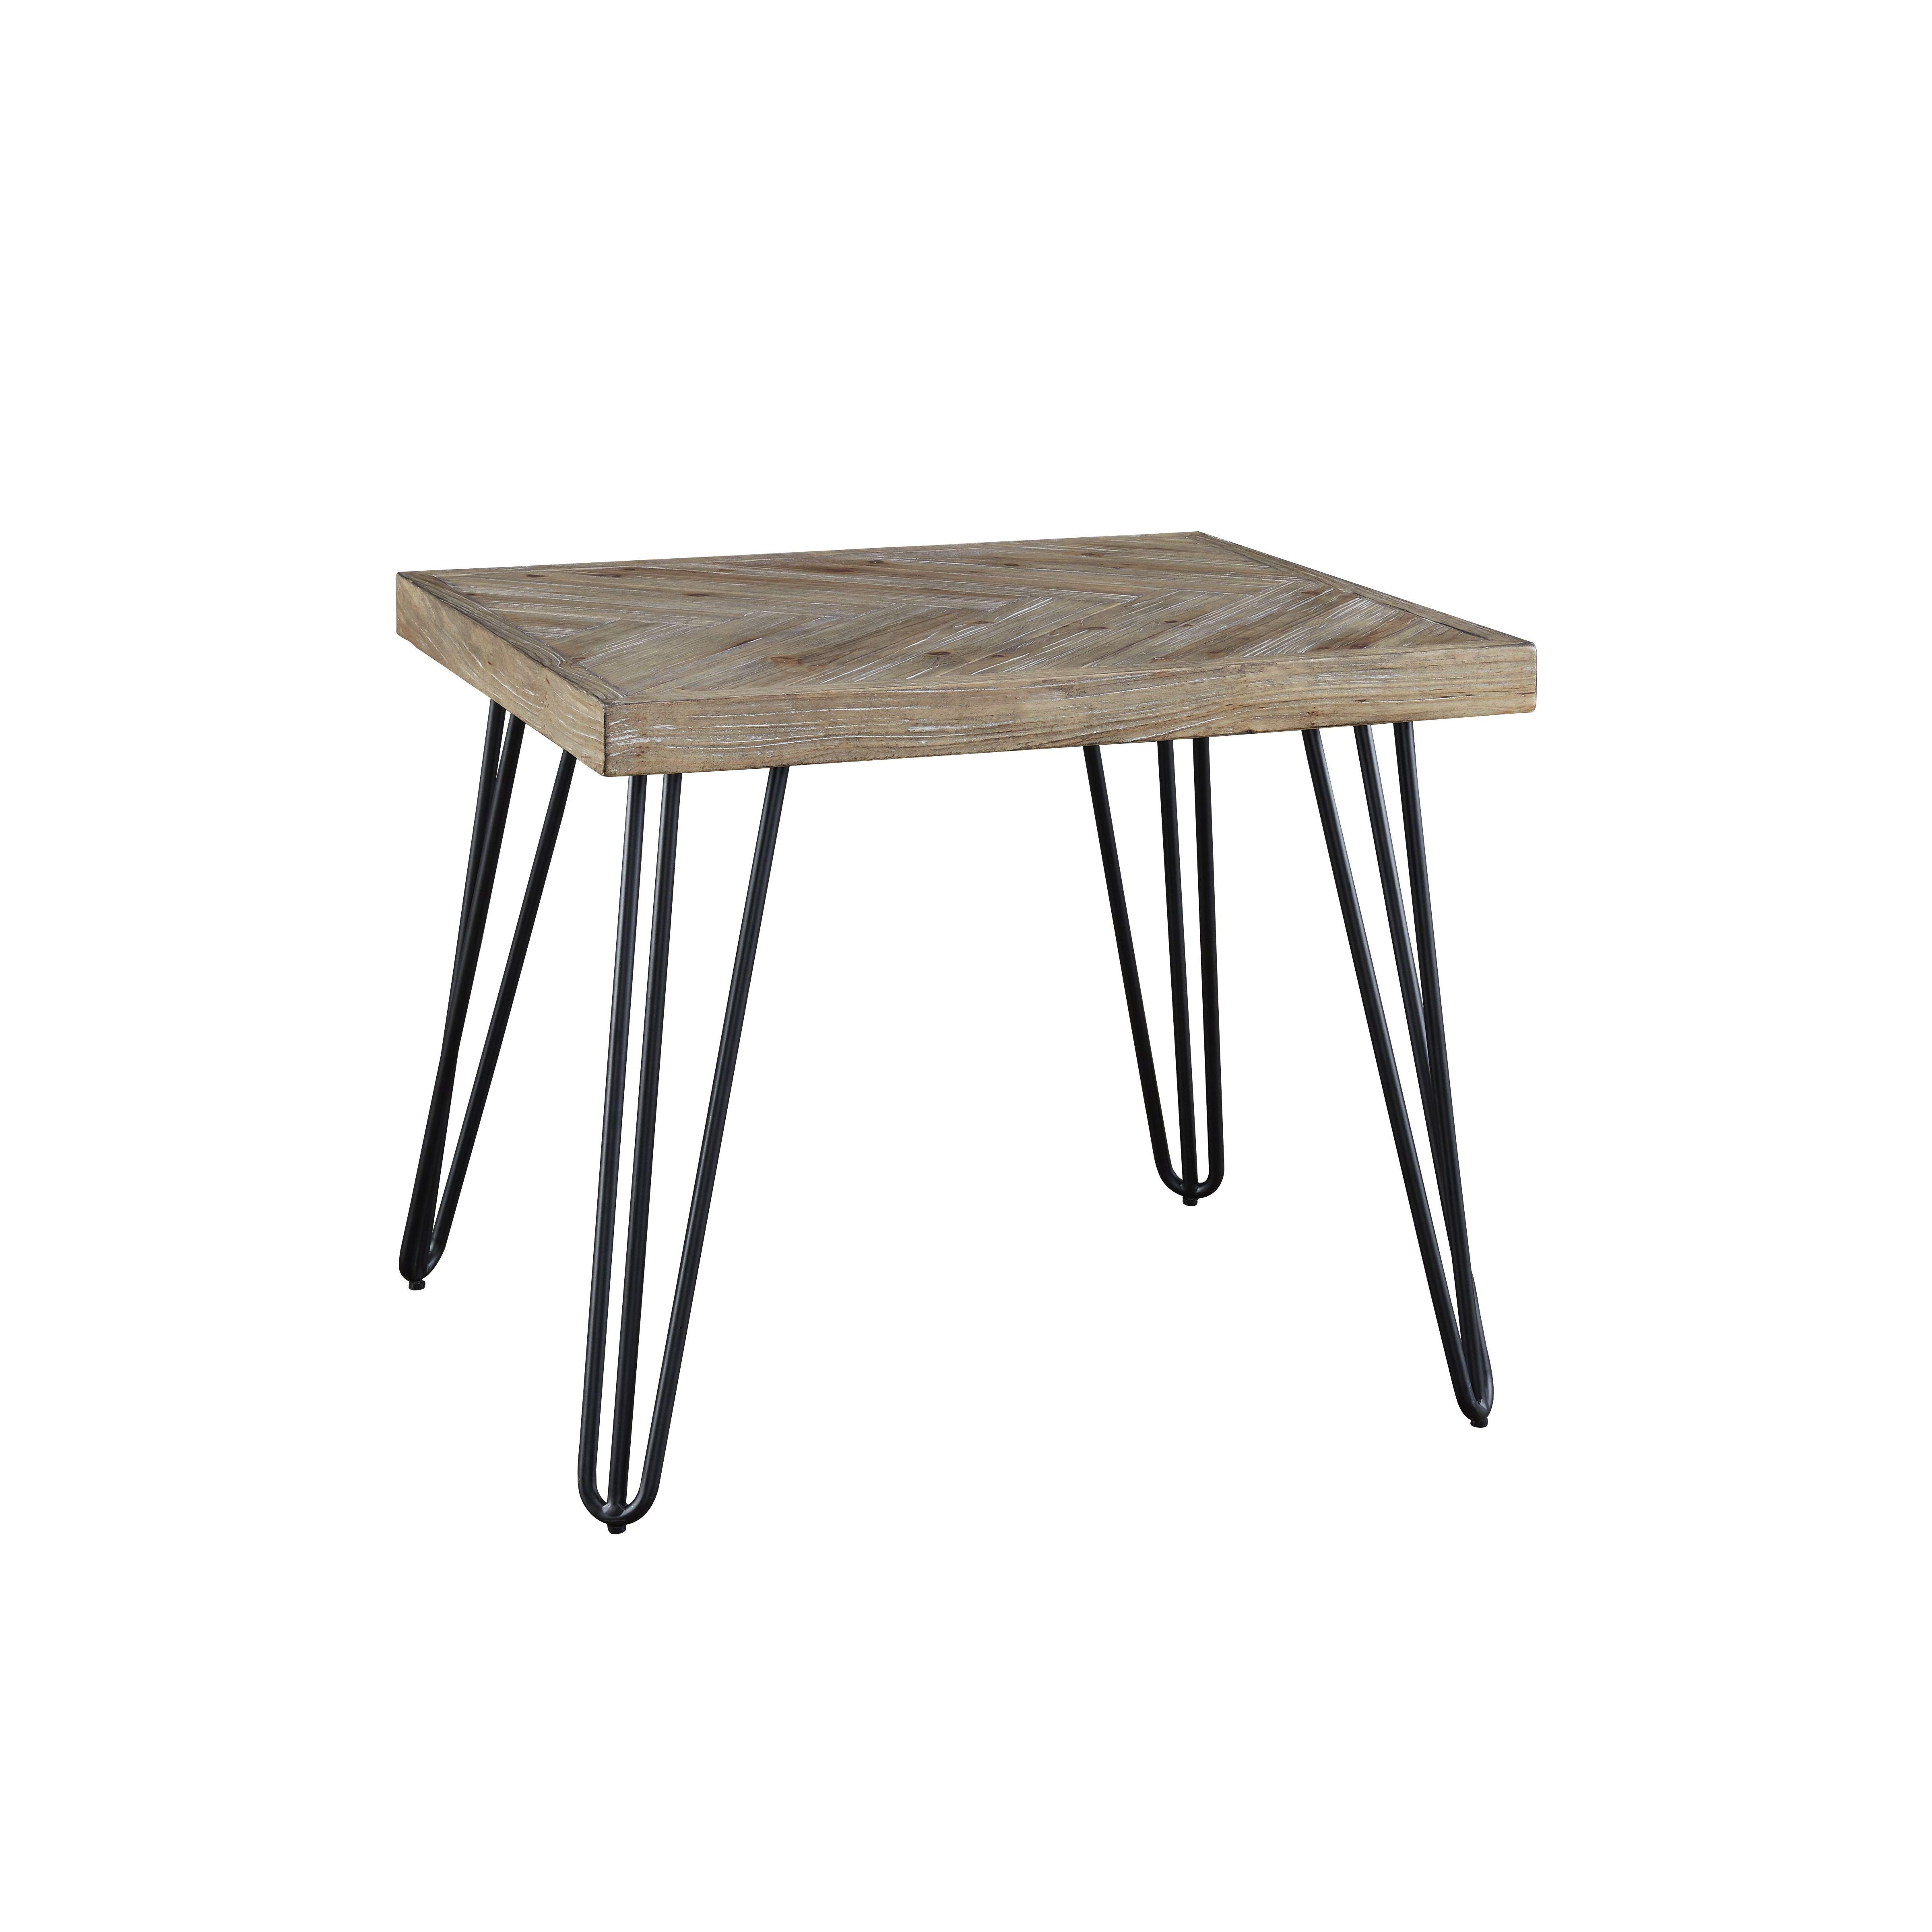 Modern End Table EVERSON DVV122 in Sand 